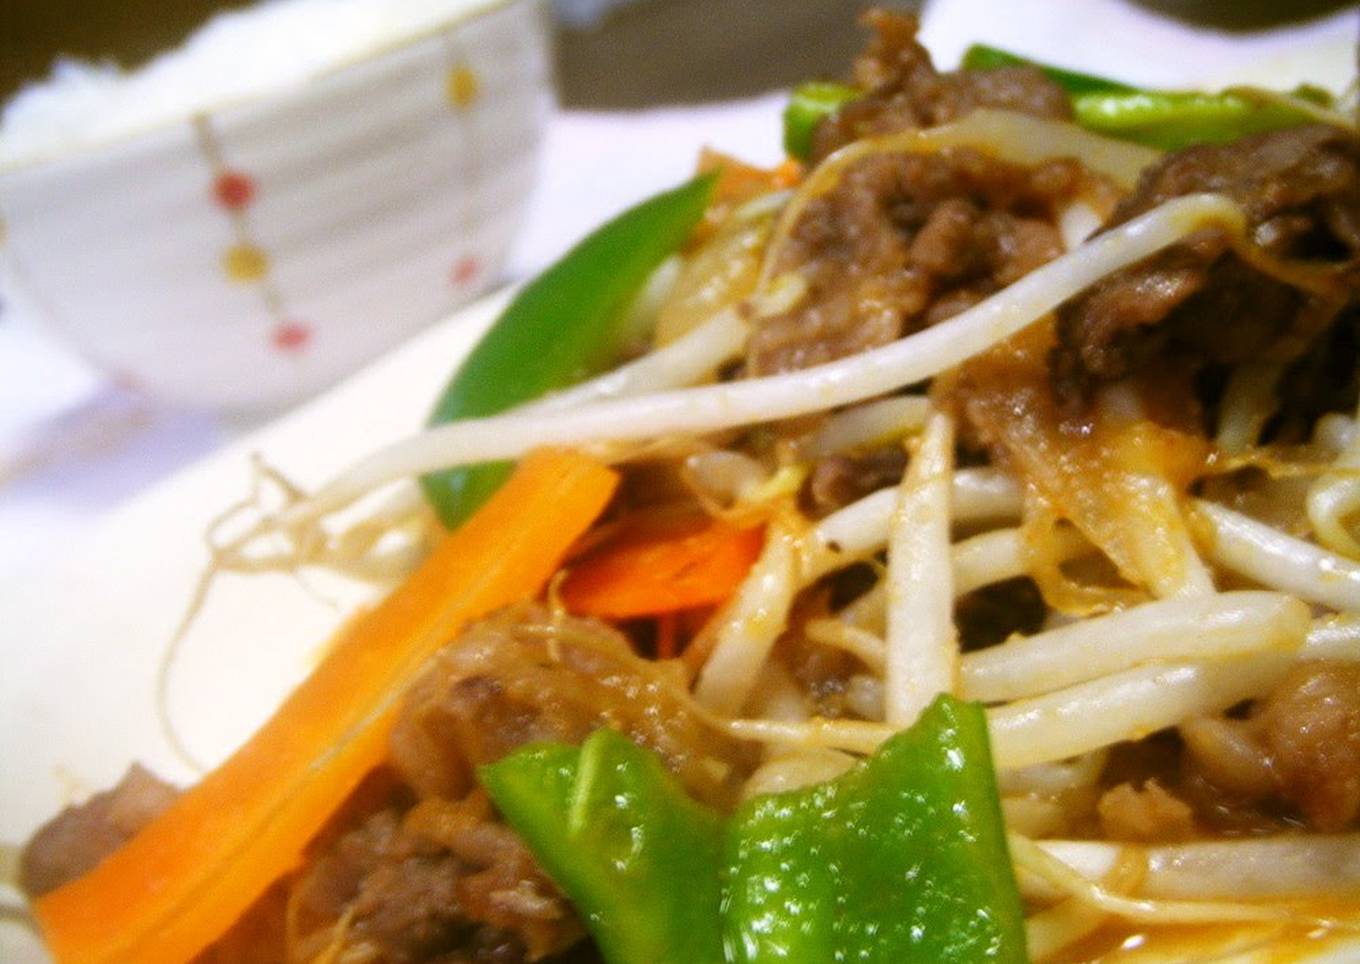 spicy beef offcuts and vegetable stir fry